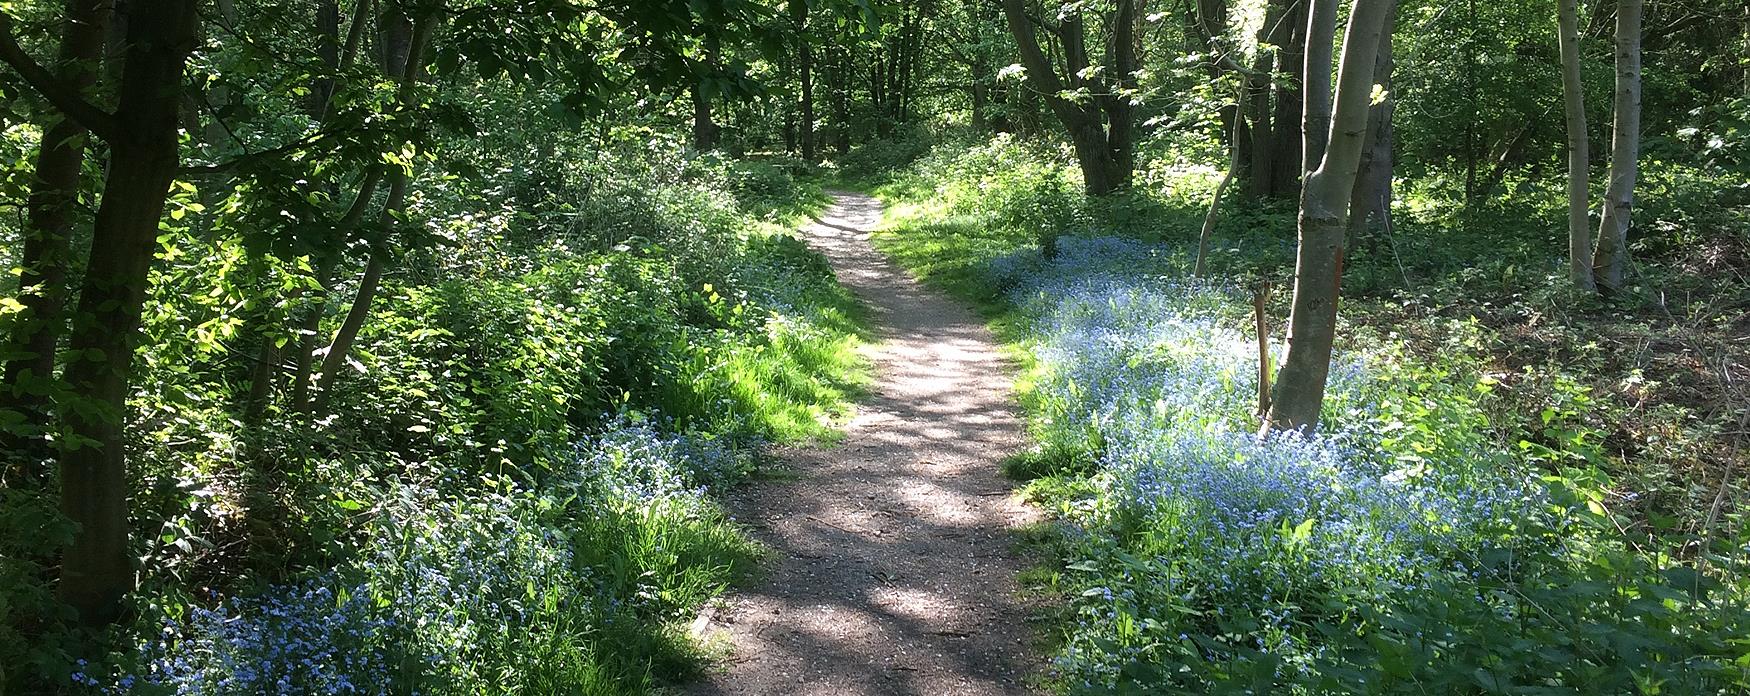 Roughtallys Wood in North Weald maintained by Epping Forest Countrycare